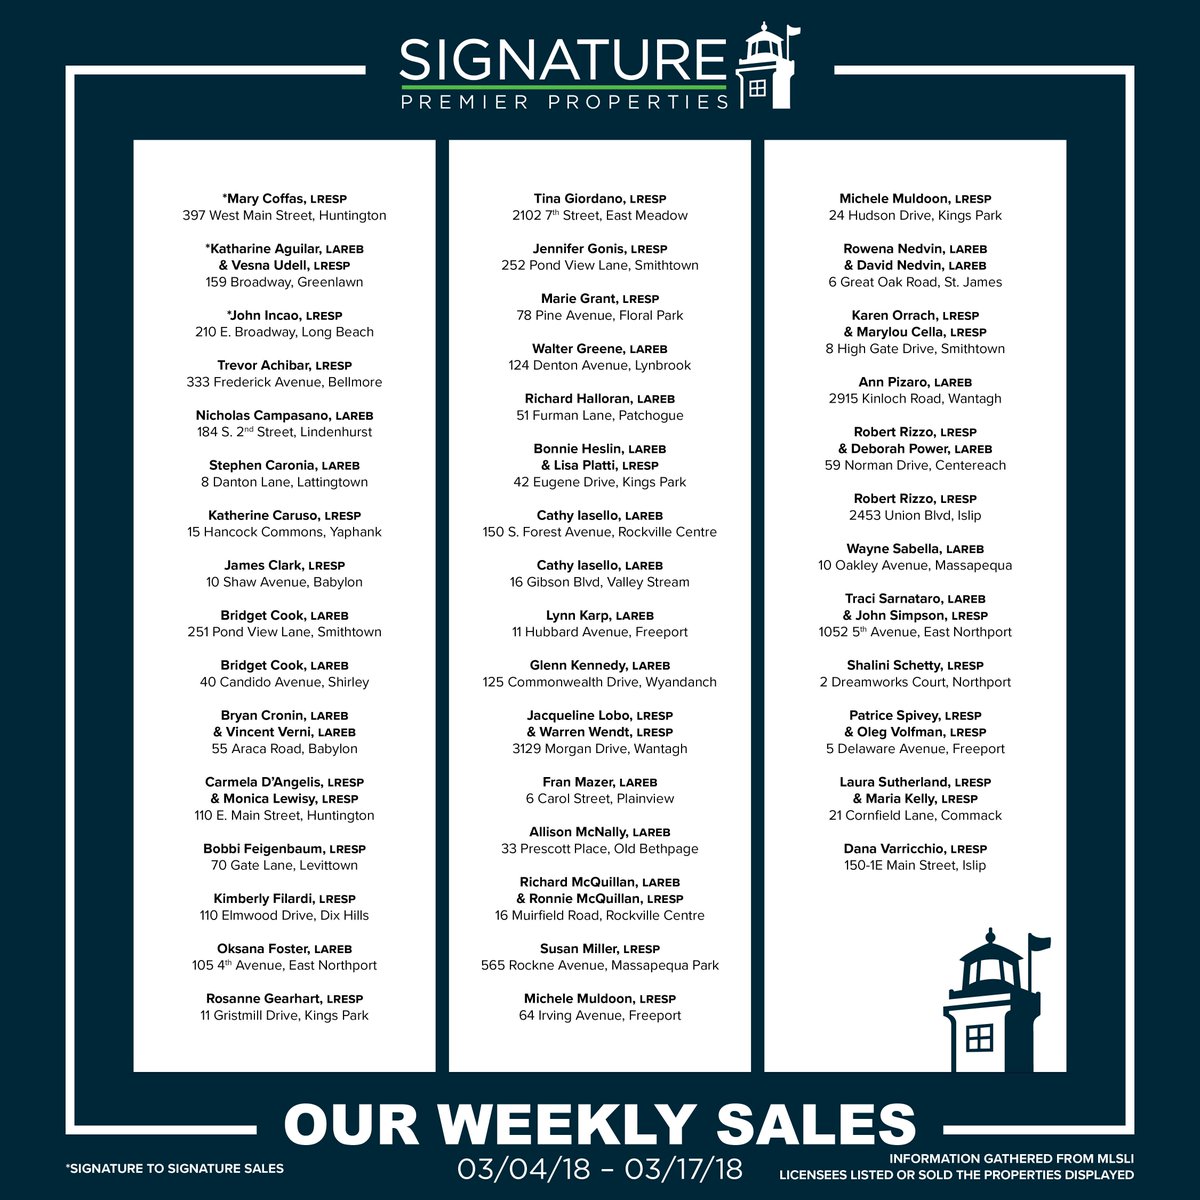 Way to go team! We sold 53 homes in the last two weeks! Congratulations to all of our hard-working sales team! #signaturesells #signature #signaturepremier #suffolk #nassau #nyc #longisland #realestate #lirealestate #sold #soldhomes #lihomes #longislandhomes